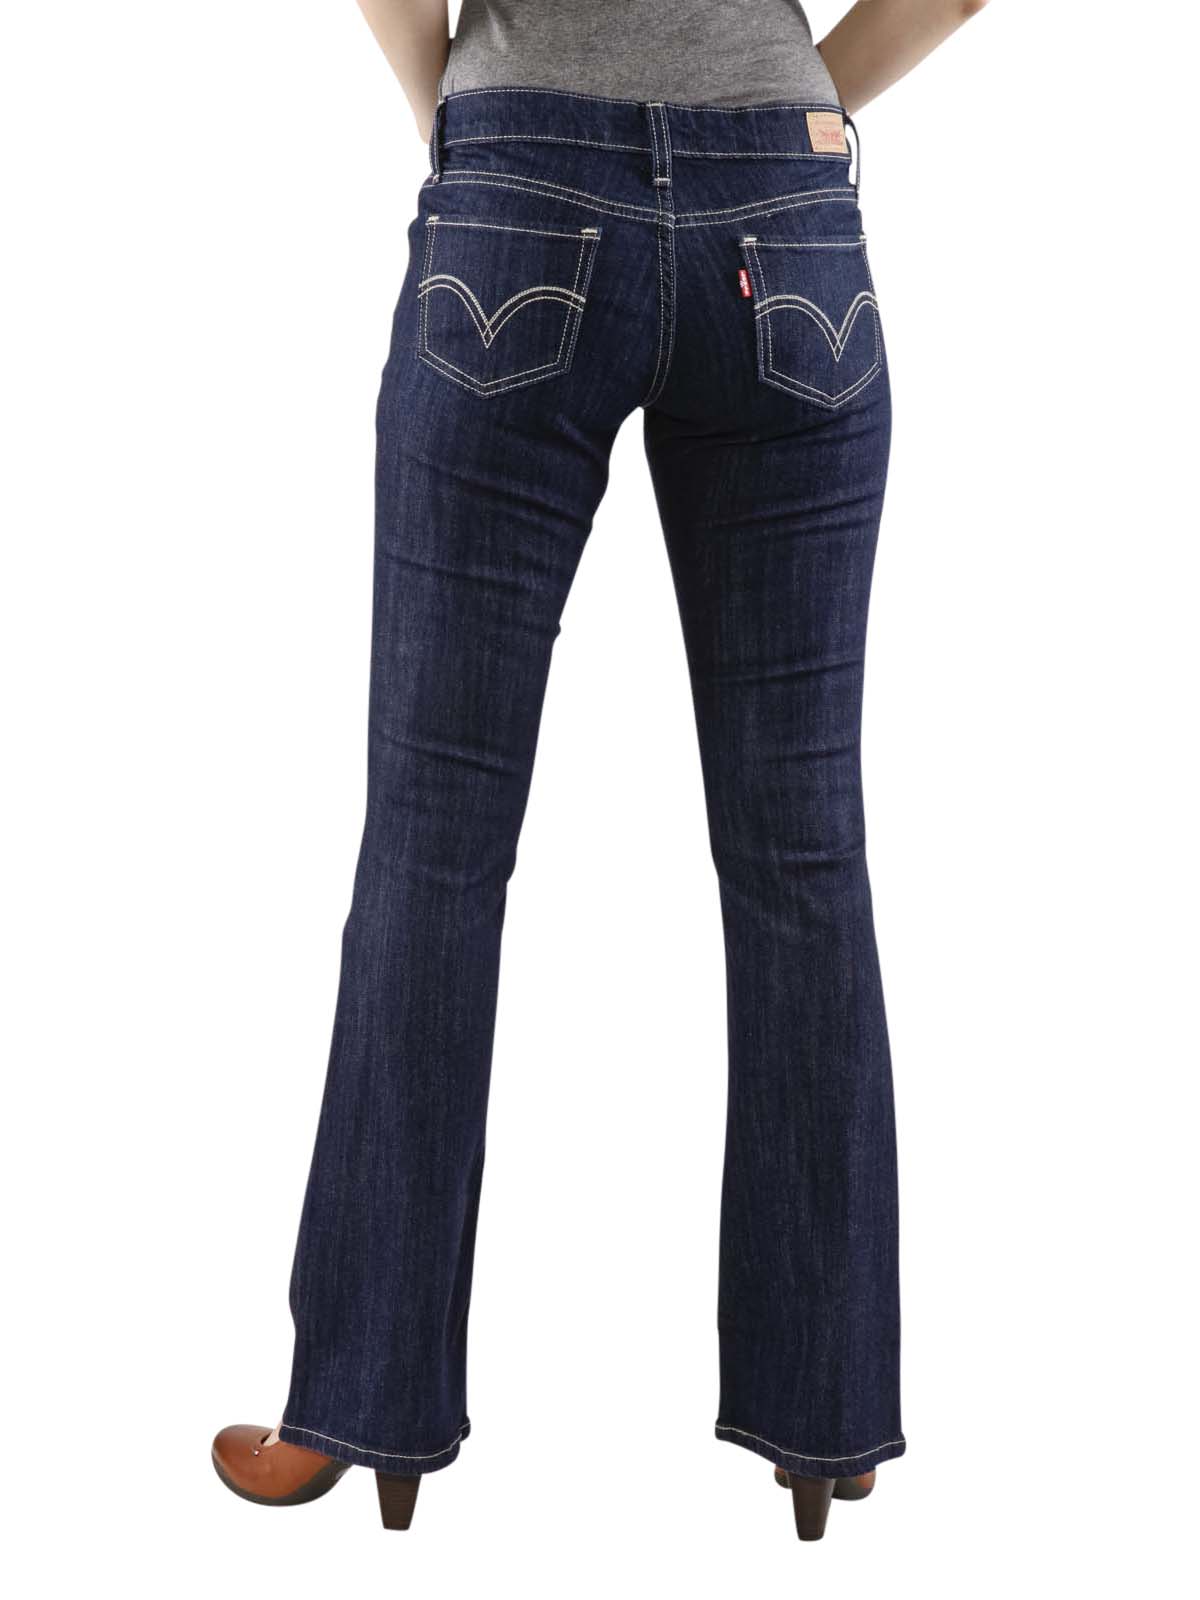 Clothing Women's Clothing Levi's 518 jeans